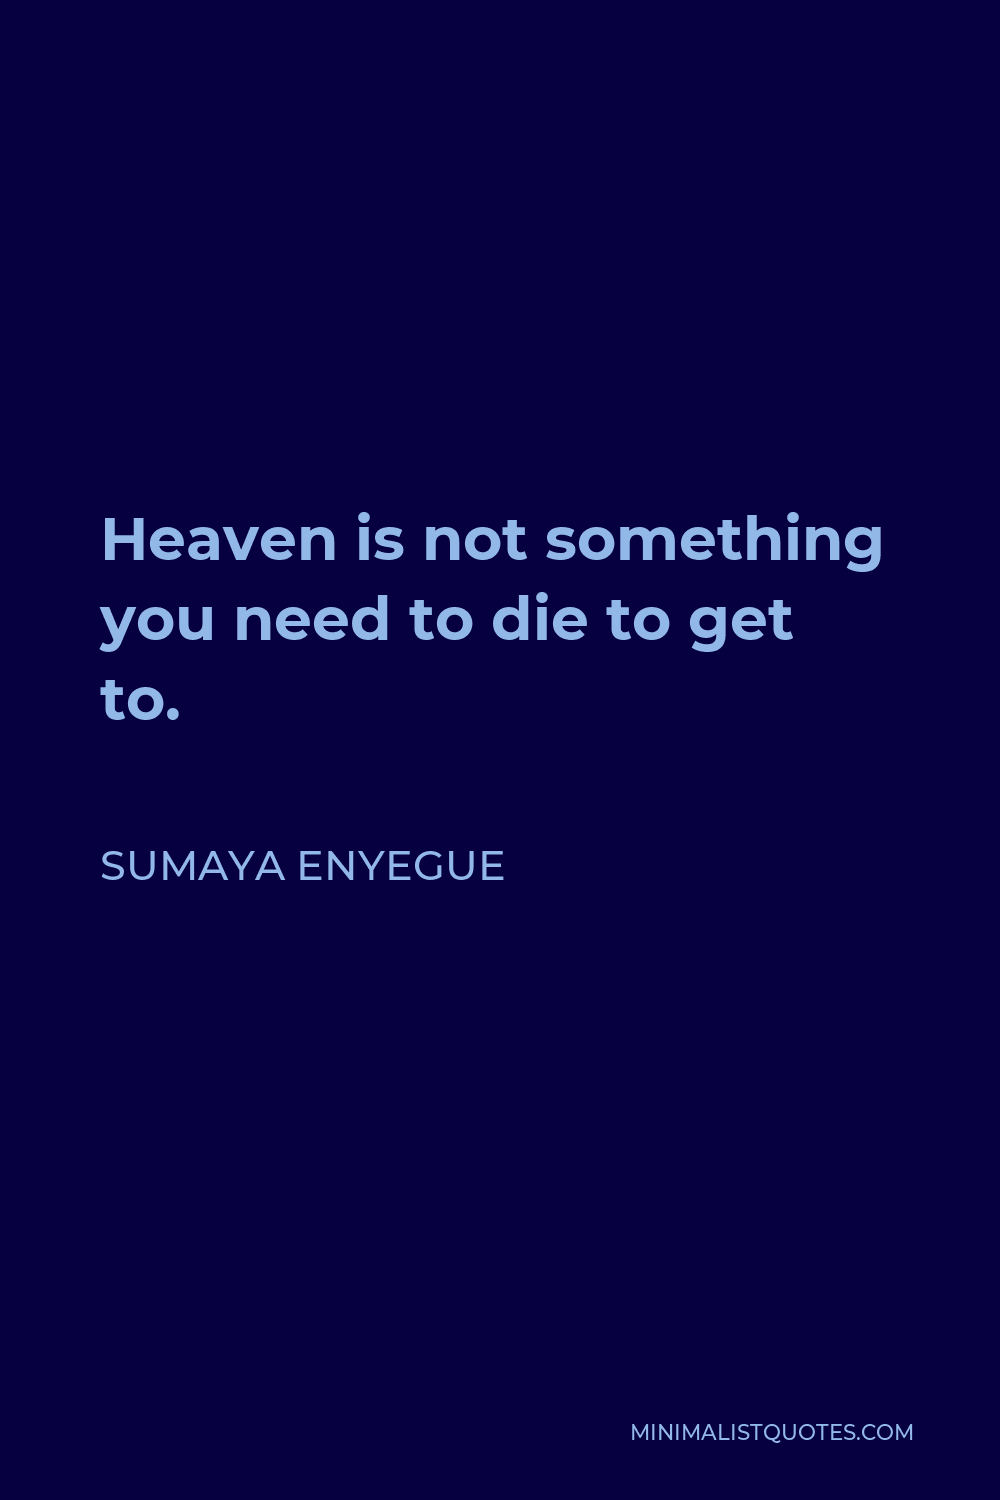 Sumaya Enyegue Quote - Heaven is not something you need to die to get to.